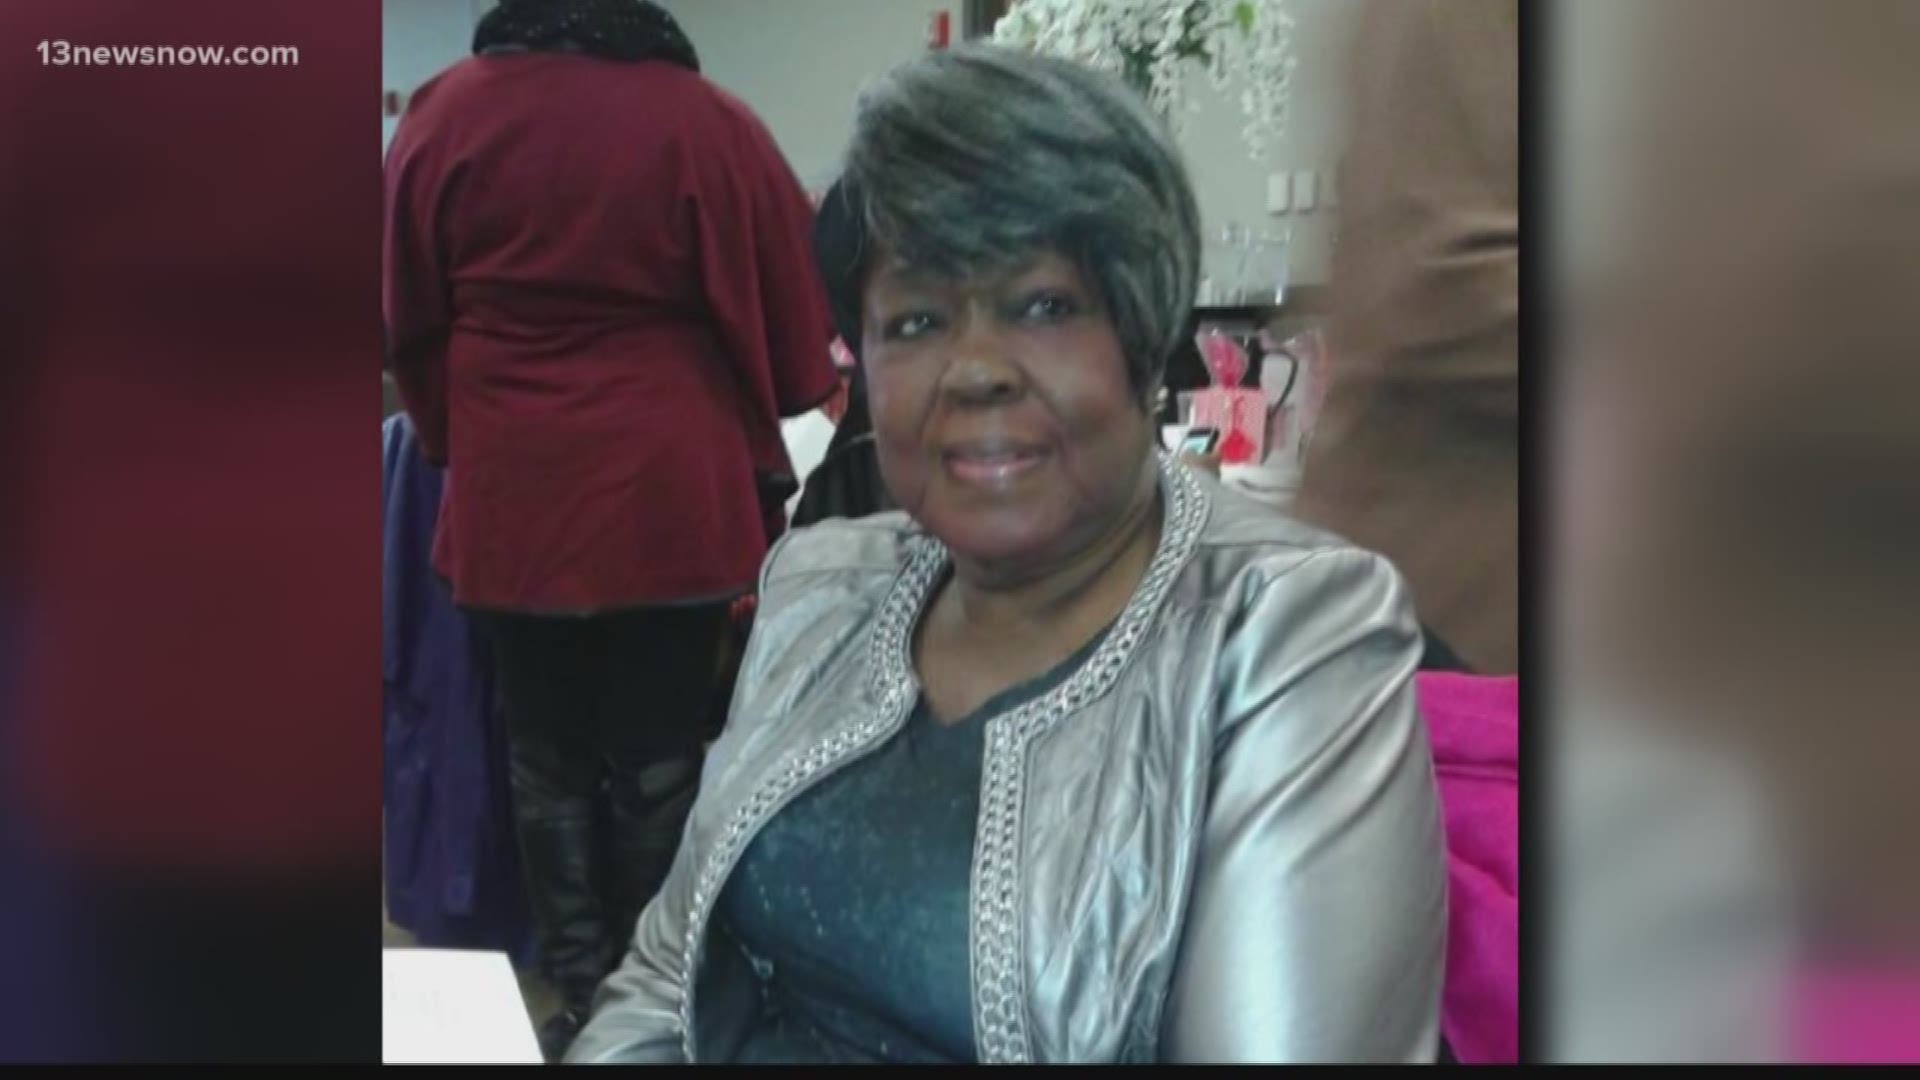 An 85-year-old woman was hospitalized after being hit by a car. The driver took off and now the family is making a plea for anyone who knows anything to come forward.